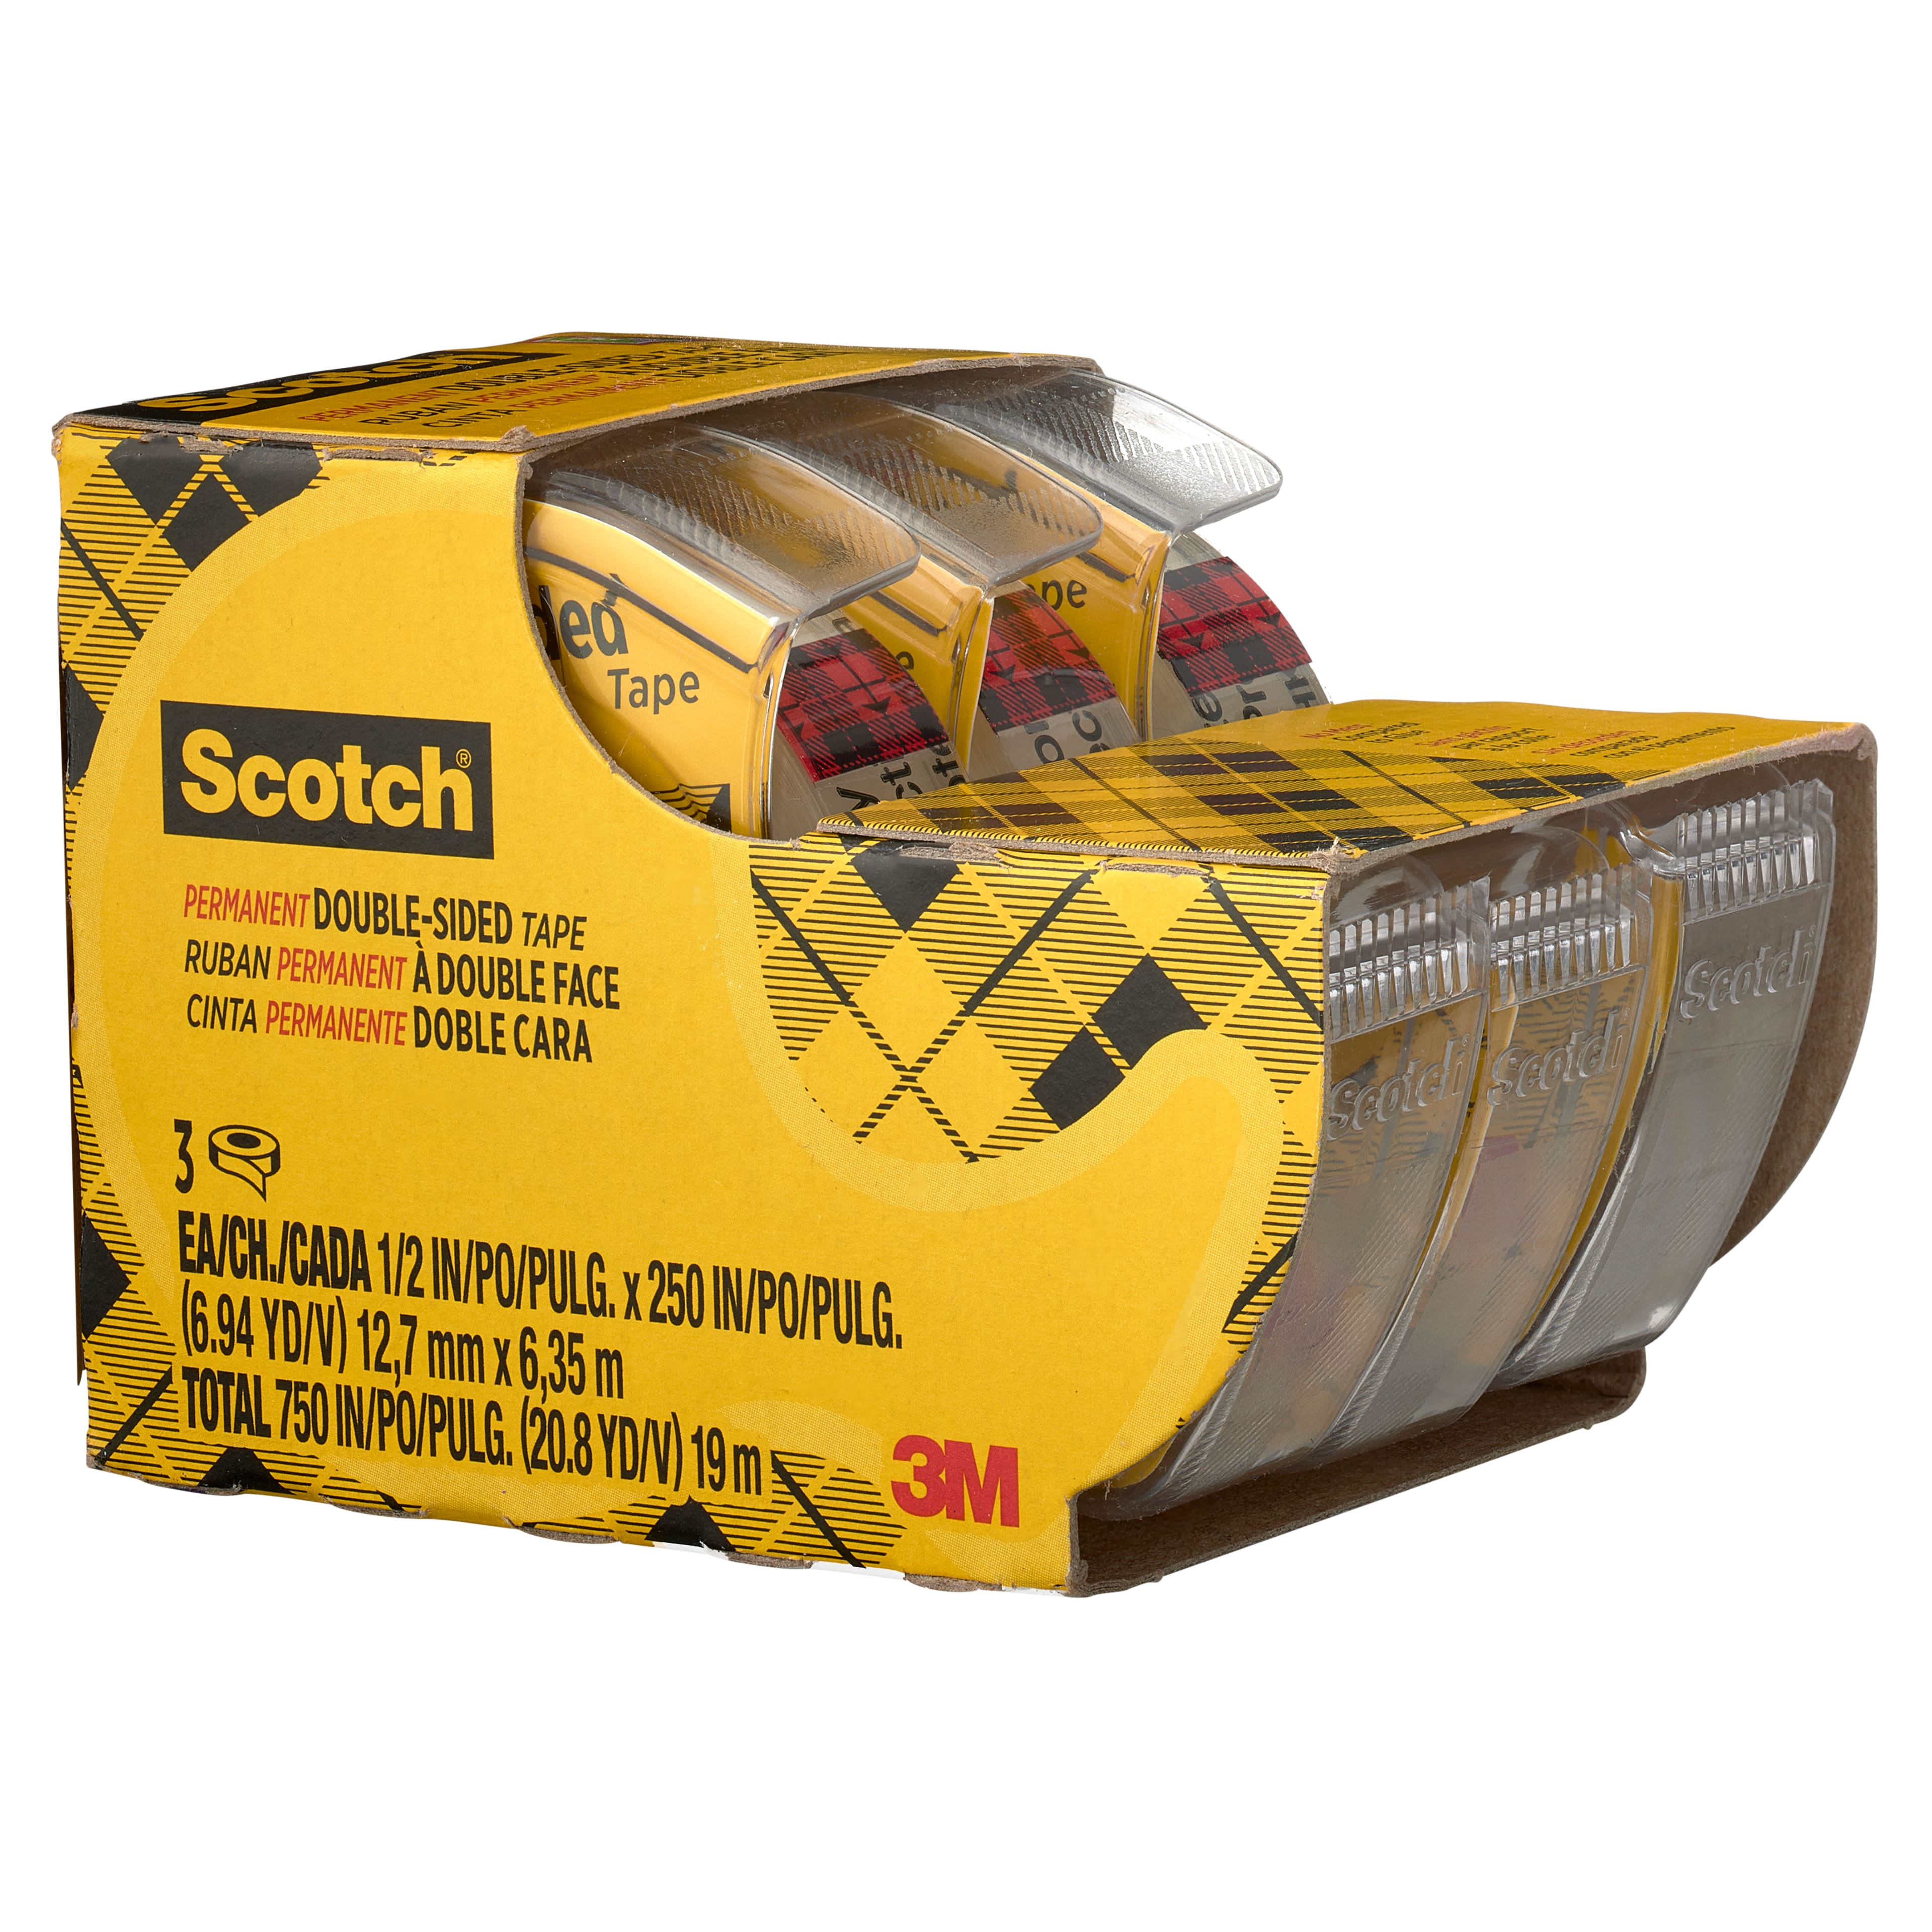 12 Packs: 3 ct. (36 total) Scotch® Double Sided Tape